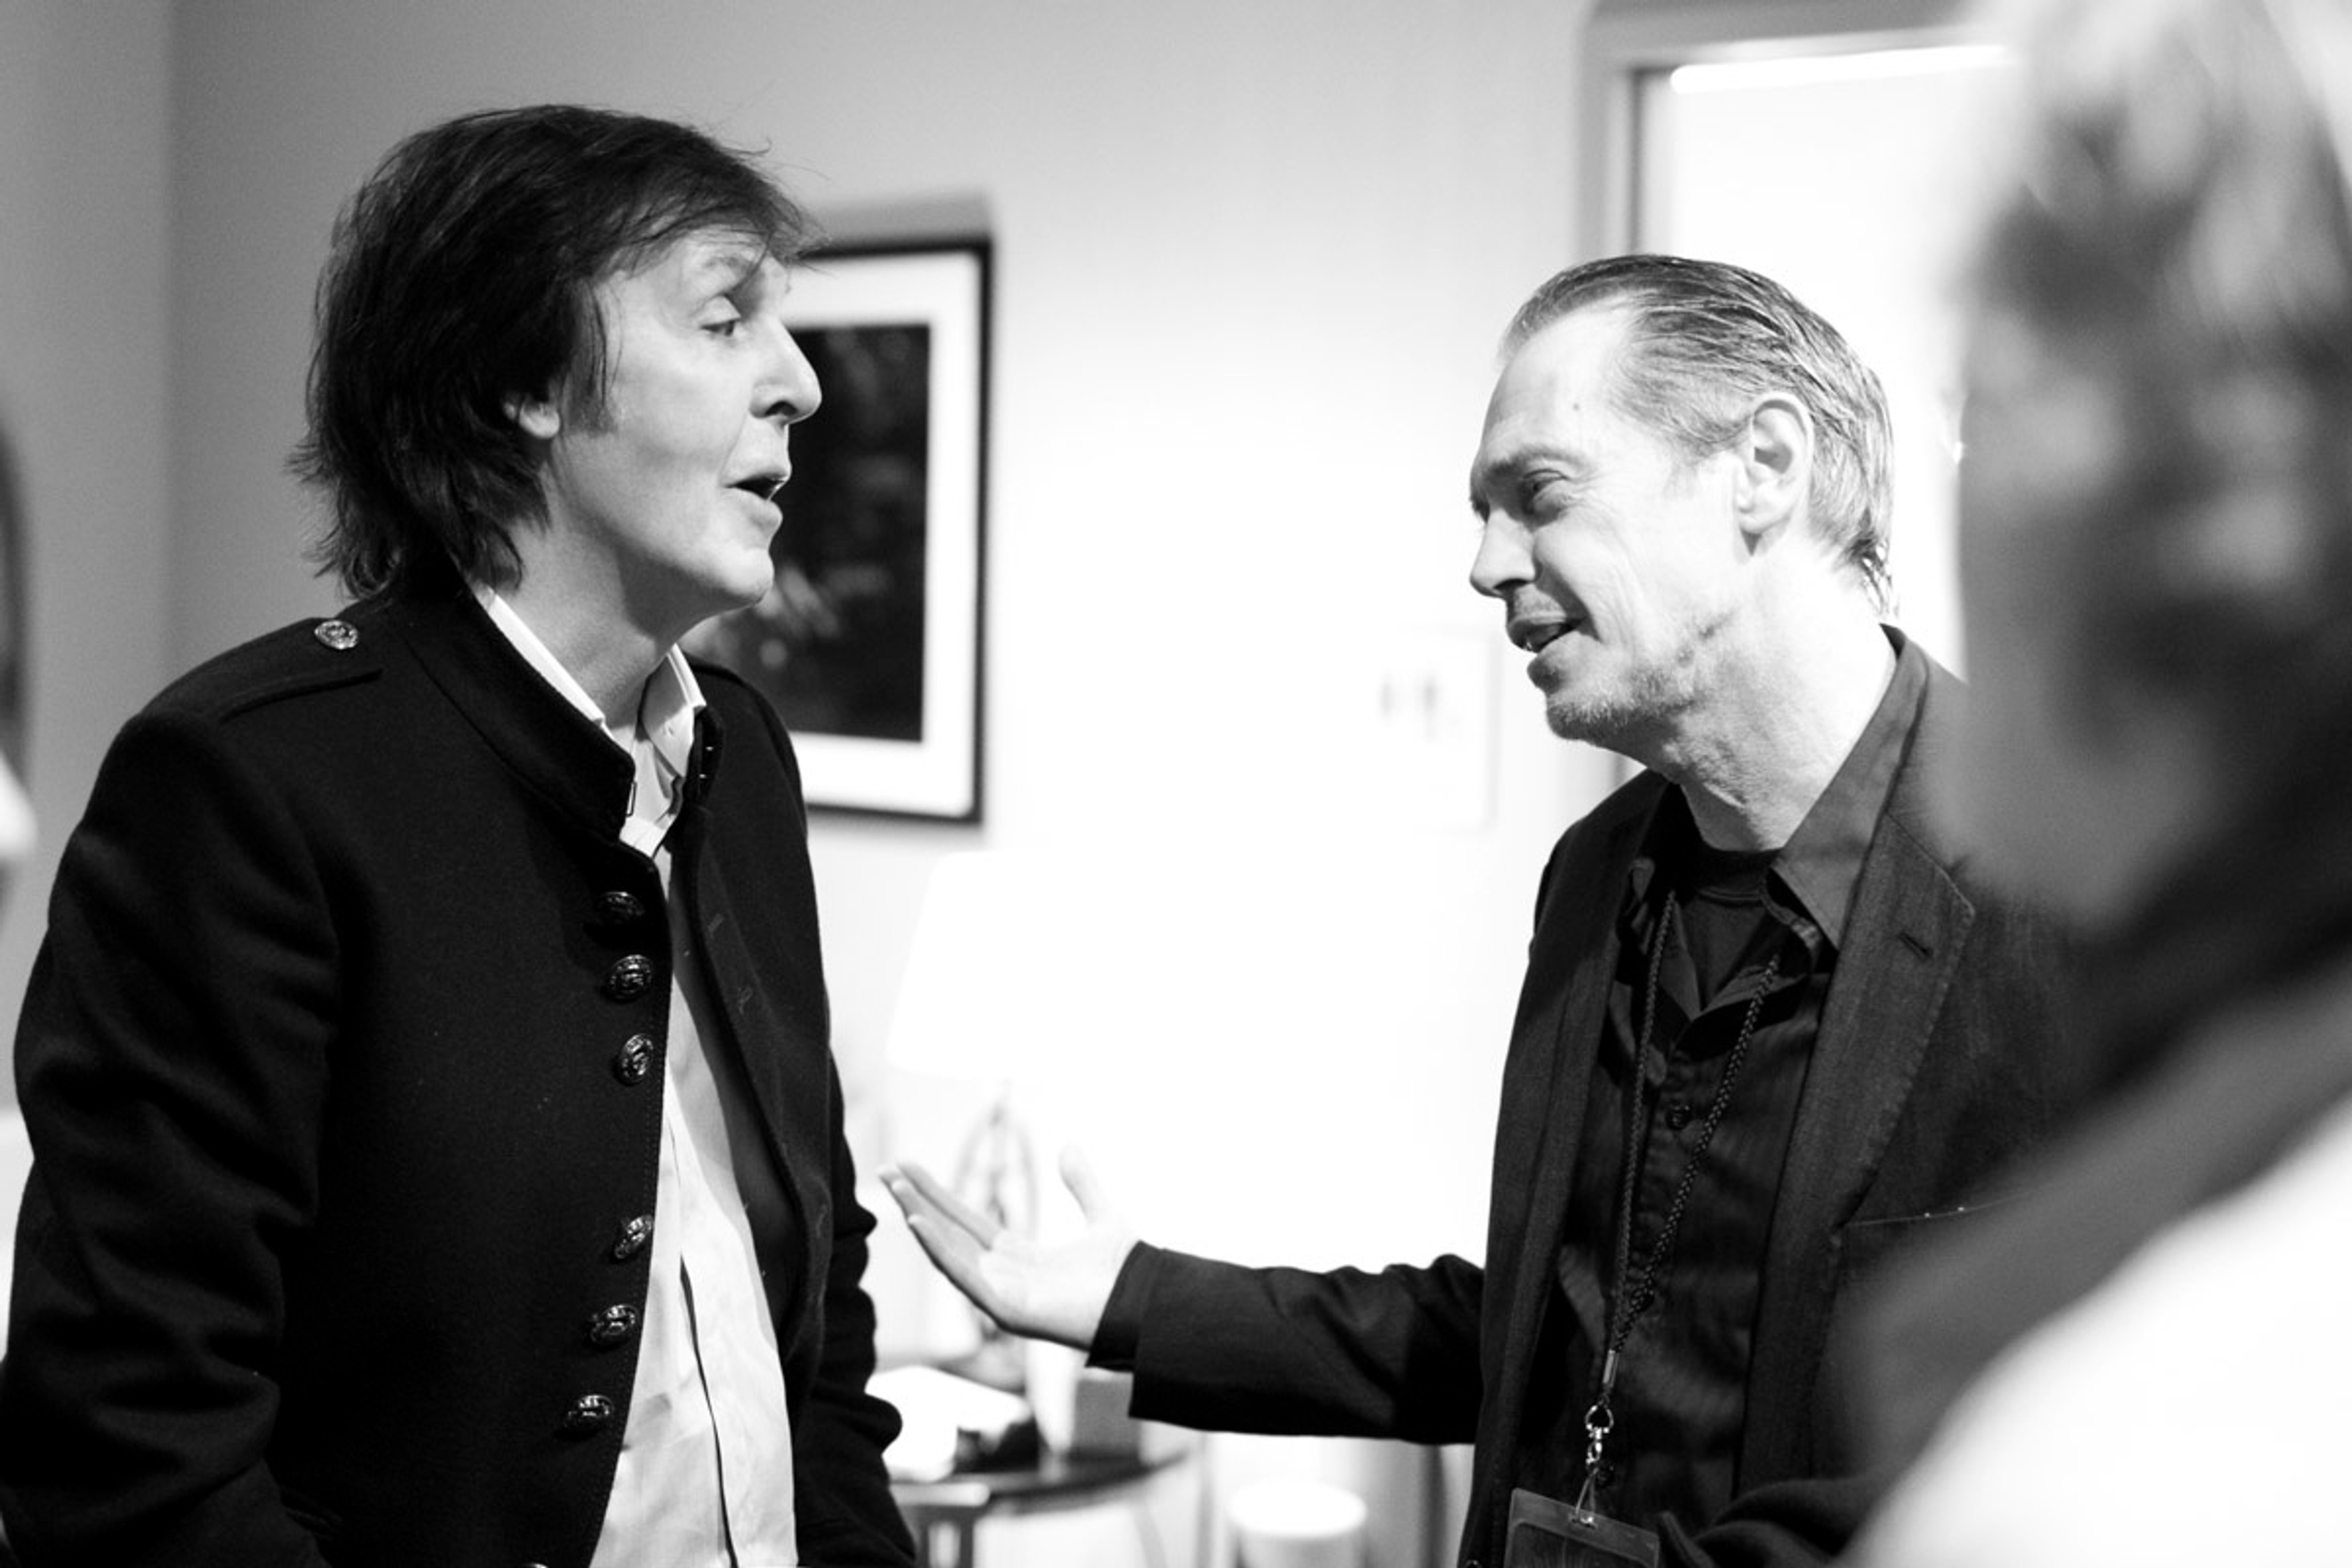 Paul backstage with Steve Buscemi, 12-12-12 Hurricane Sandy Benefit, Madison Square Garden, NYC, 12th December 2012